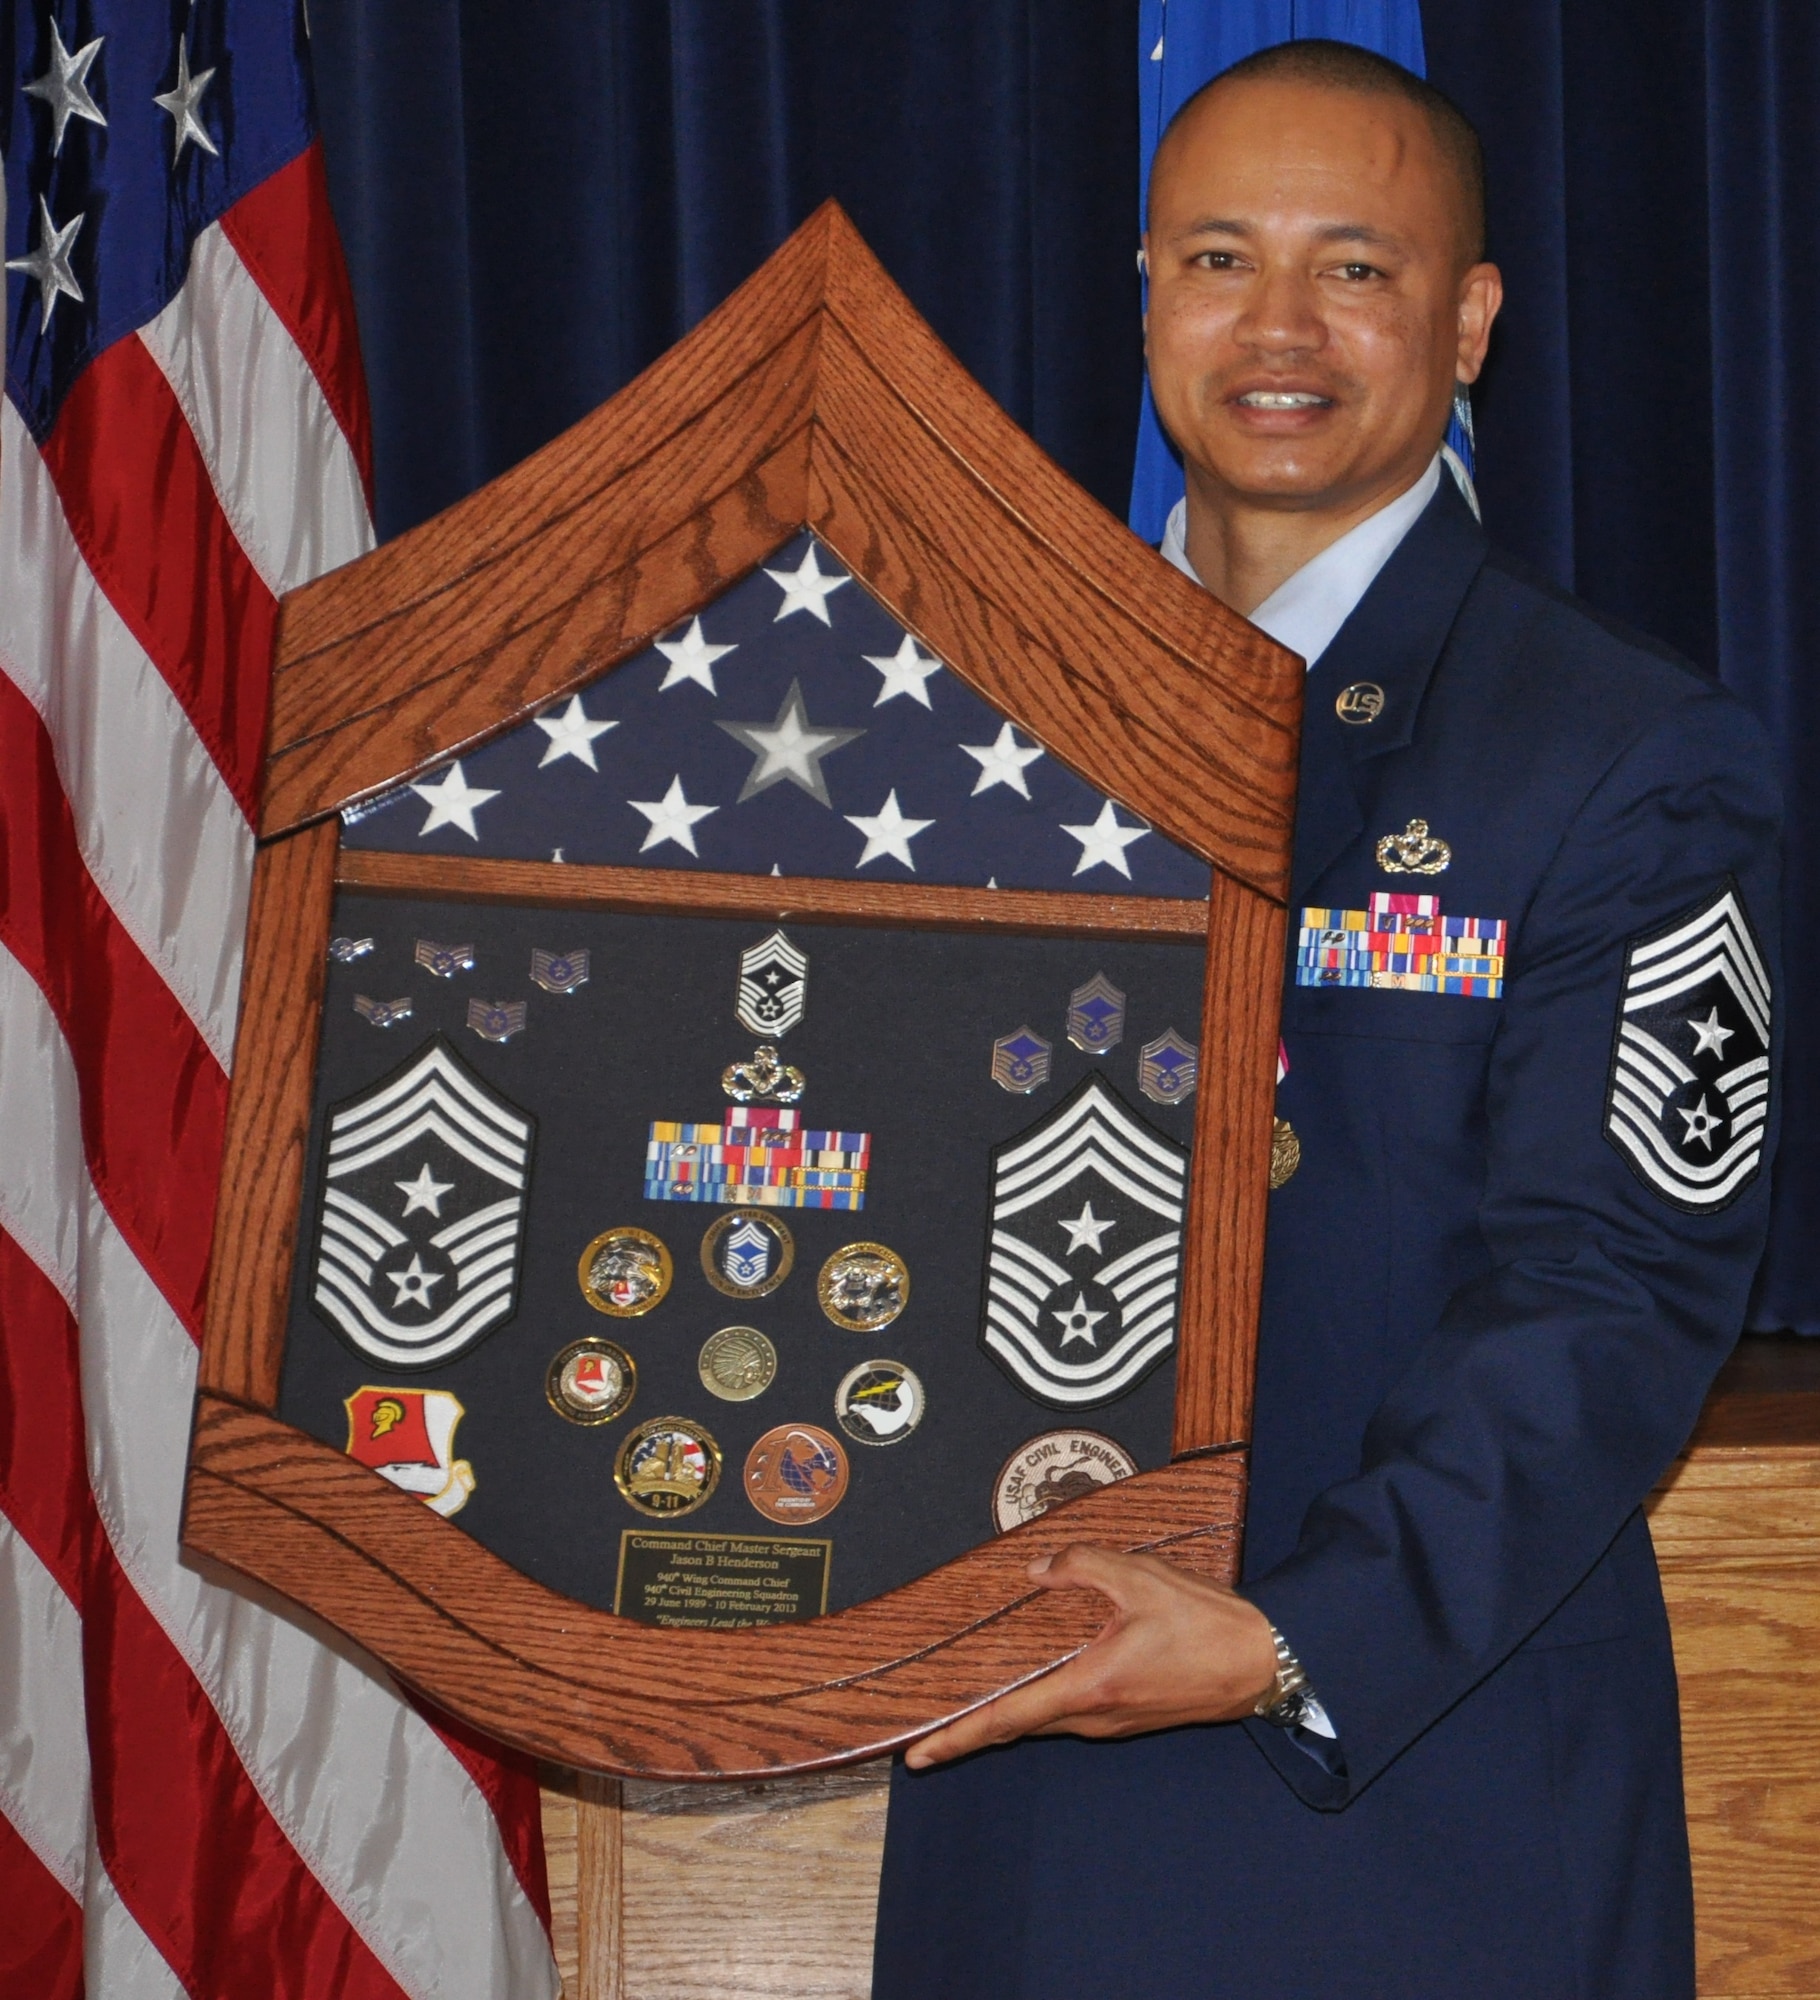 CMSgt Henderson recieves a shadow box containing momentos of his career during his retirement ceremony on Feb 10, during the UTA weekend.  Chief Henderson retires from the US Air Force after 24 years of service, four of which were as the command chief of the 940th Wing. (U.S. Air Force photo/SrA Adam Hamar)